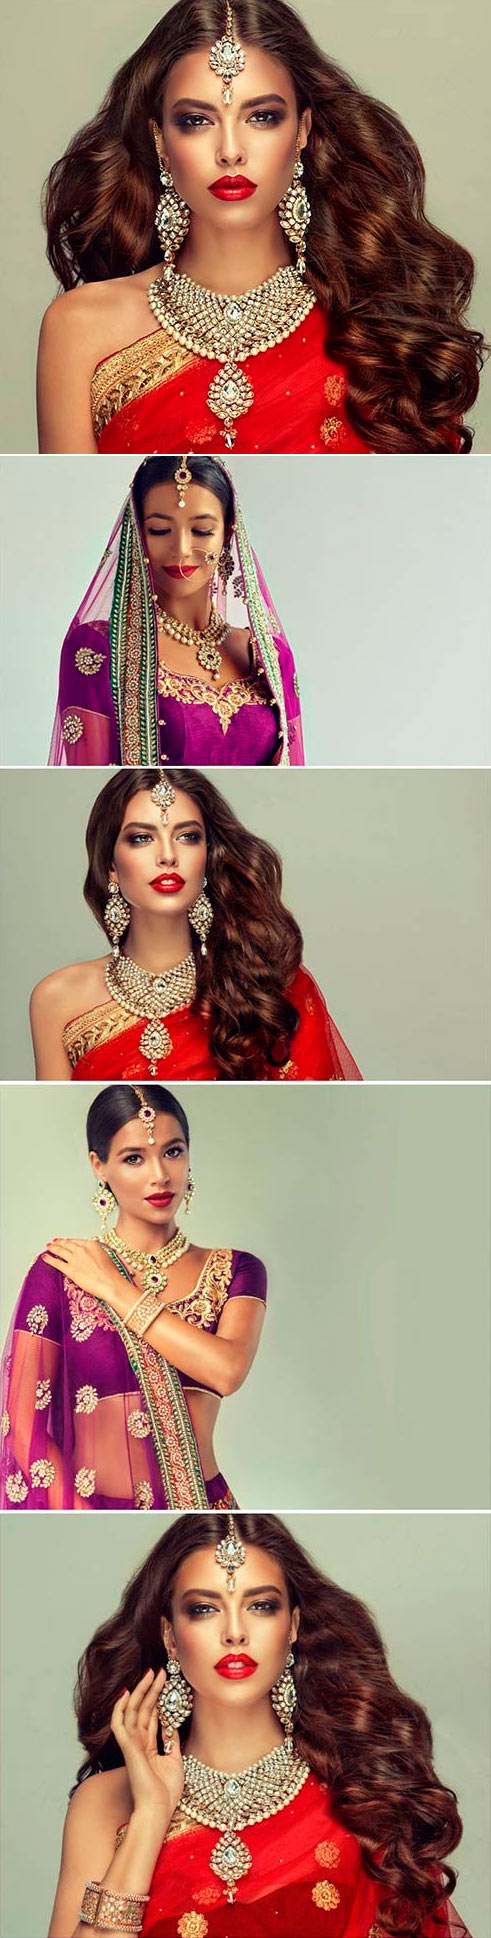 Beautiful Indian girls with precious jewels